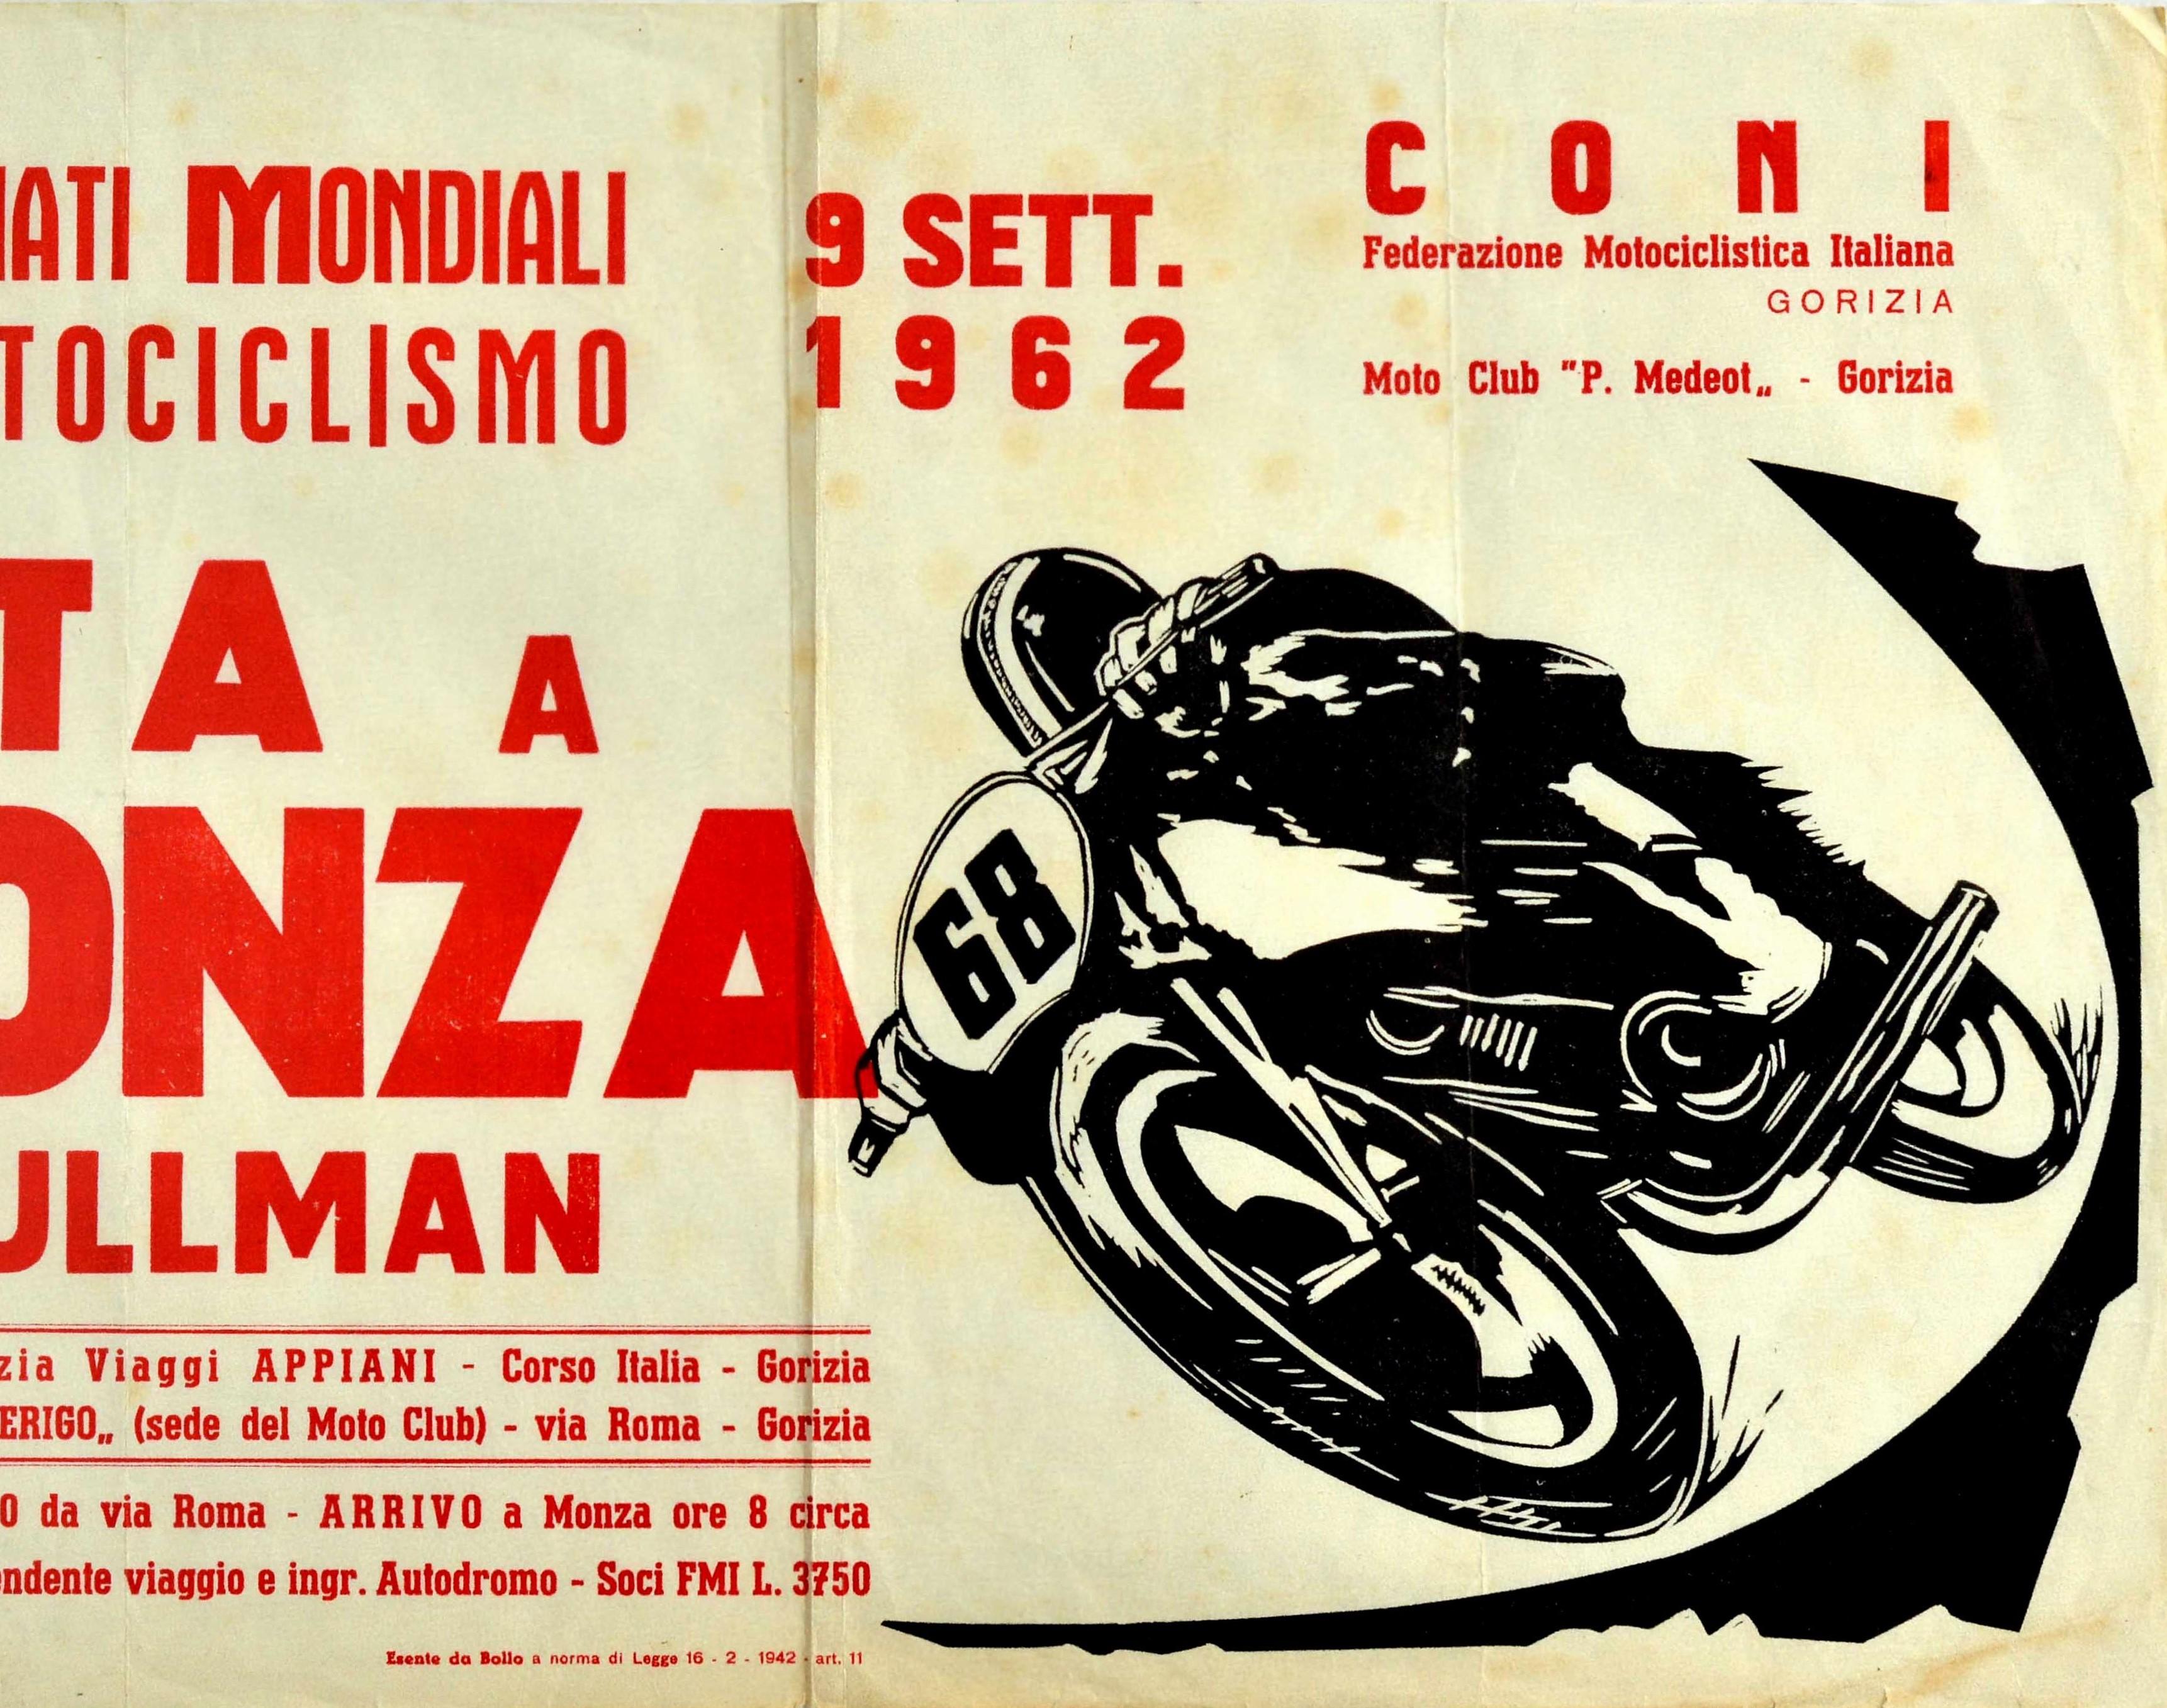 Original vintage sport advertising poster for the 1962 World Motorcycling Championships in Monza on 9 September - Campionati Mondiale di Ciclicismo Gita a Monza in Pullman 9 Sett. 1962 - featuring a dynamic image in black and white of a motorcycle